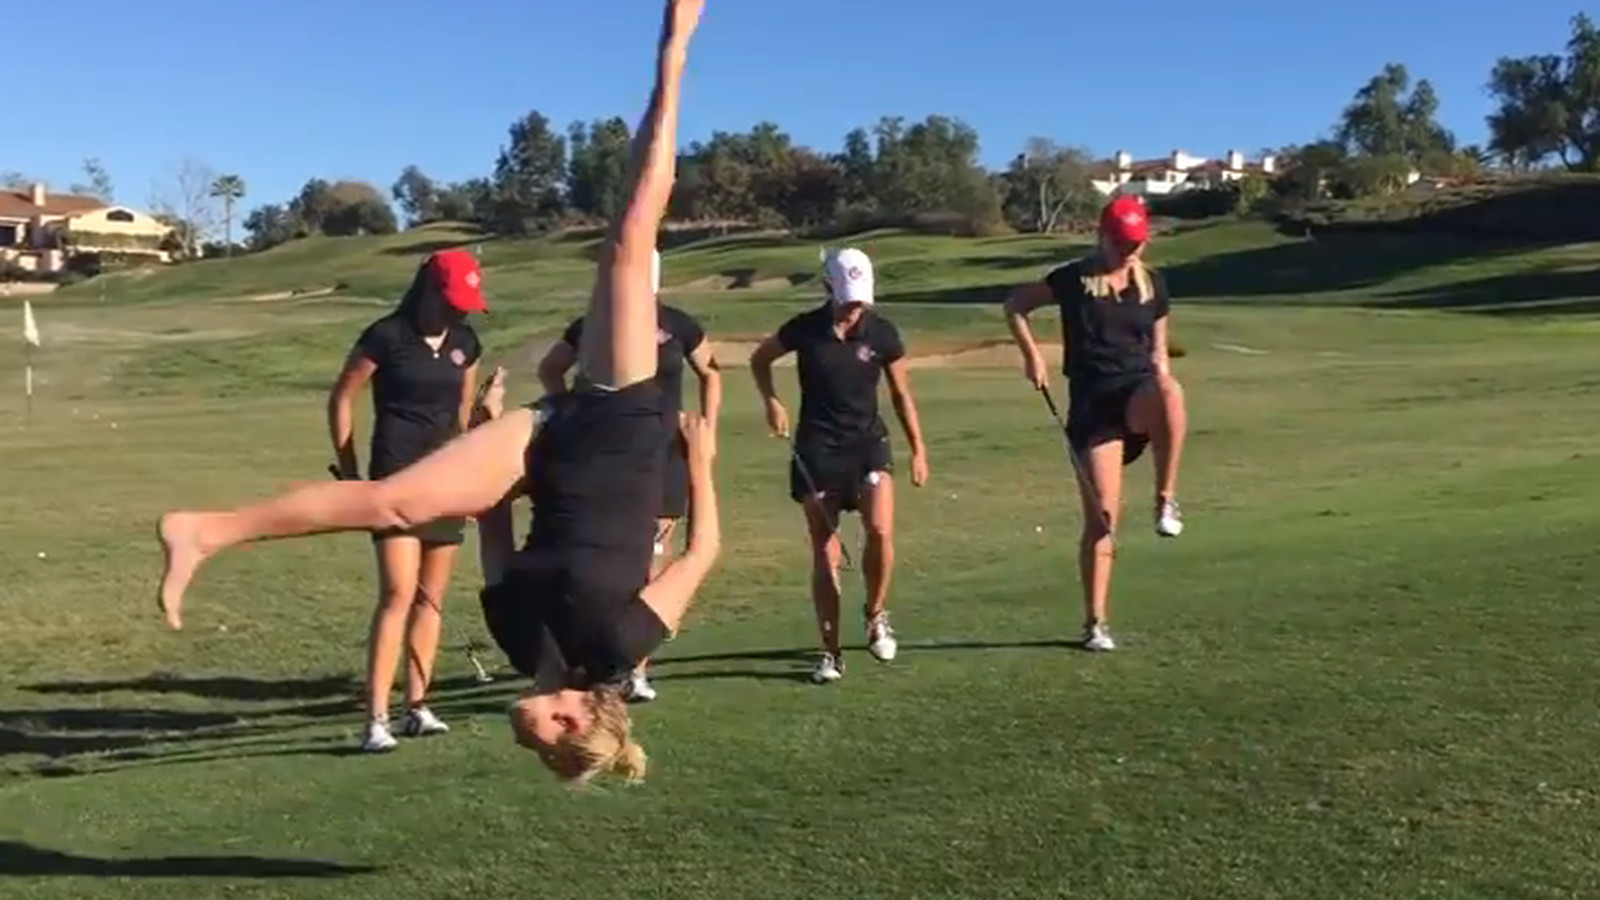 Watch a women's college team make golf look cool with amazing trick